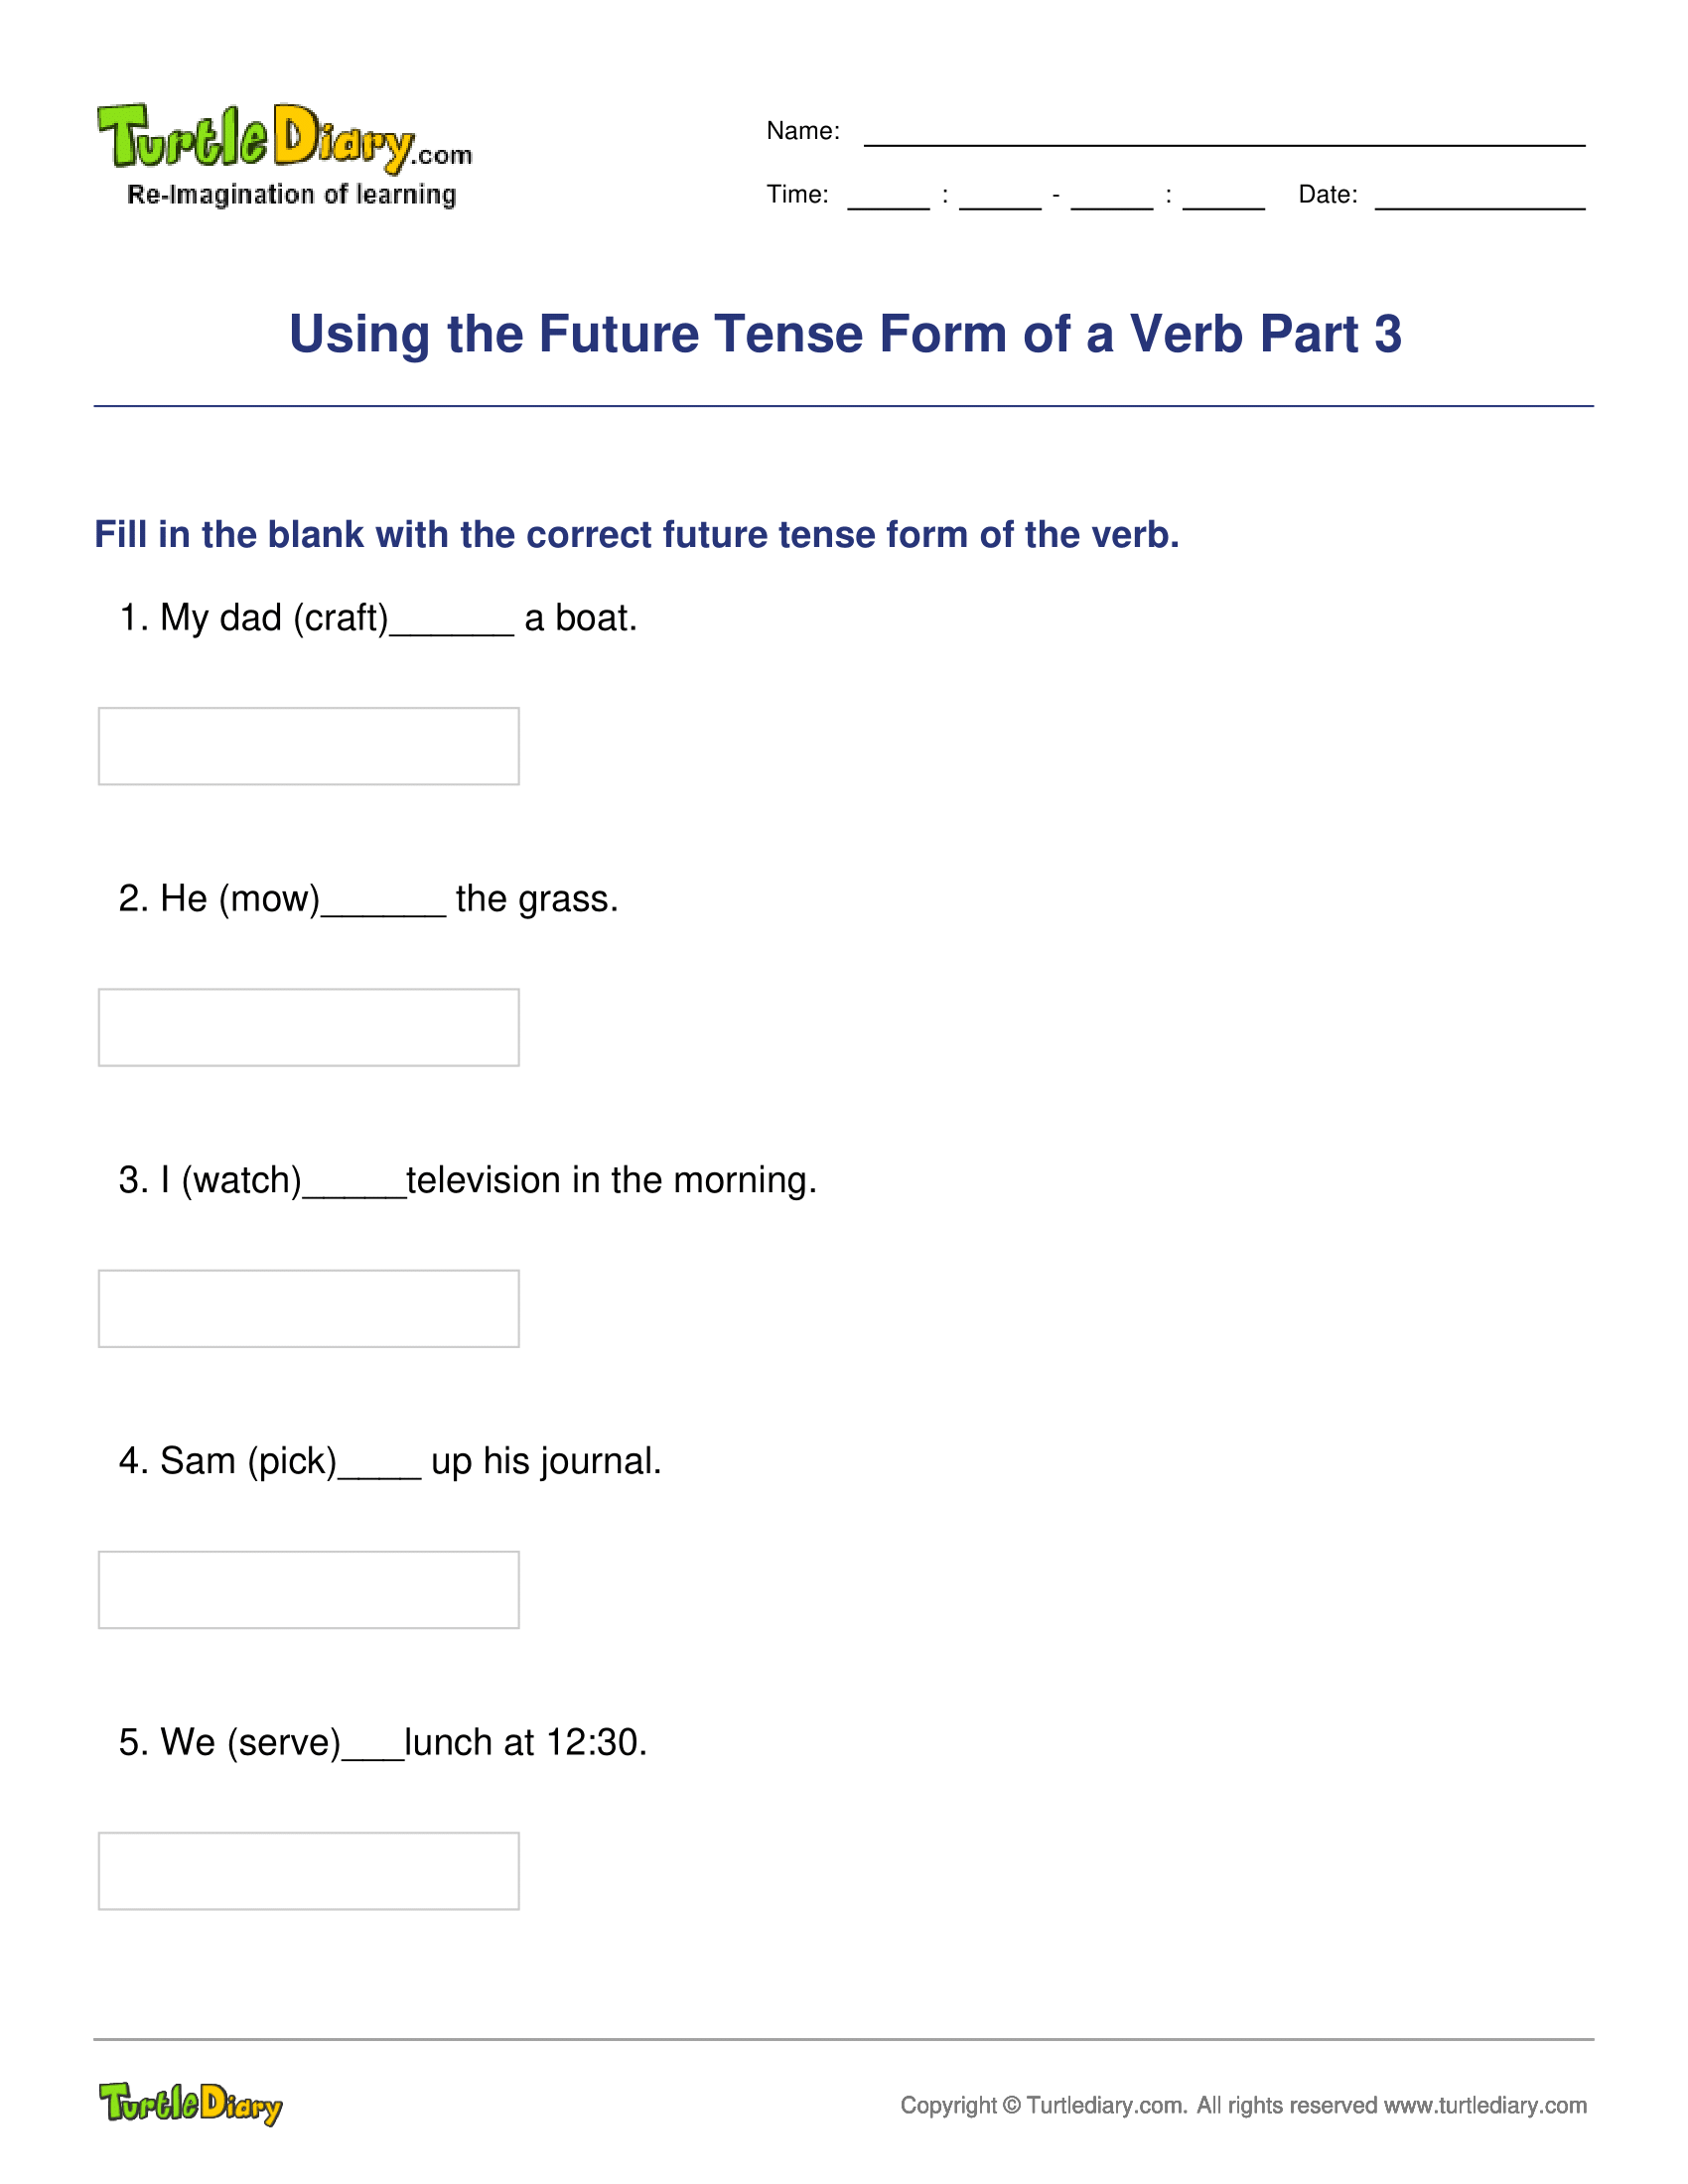 Using the Future Tense Form of a Verb Part 3